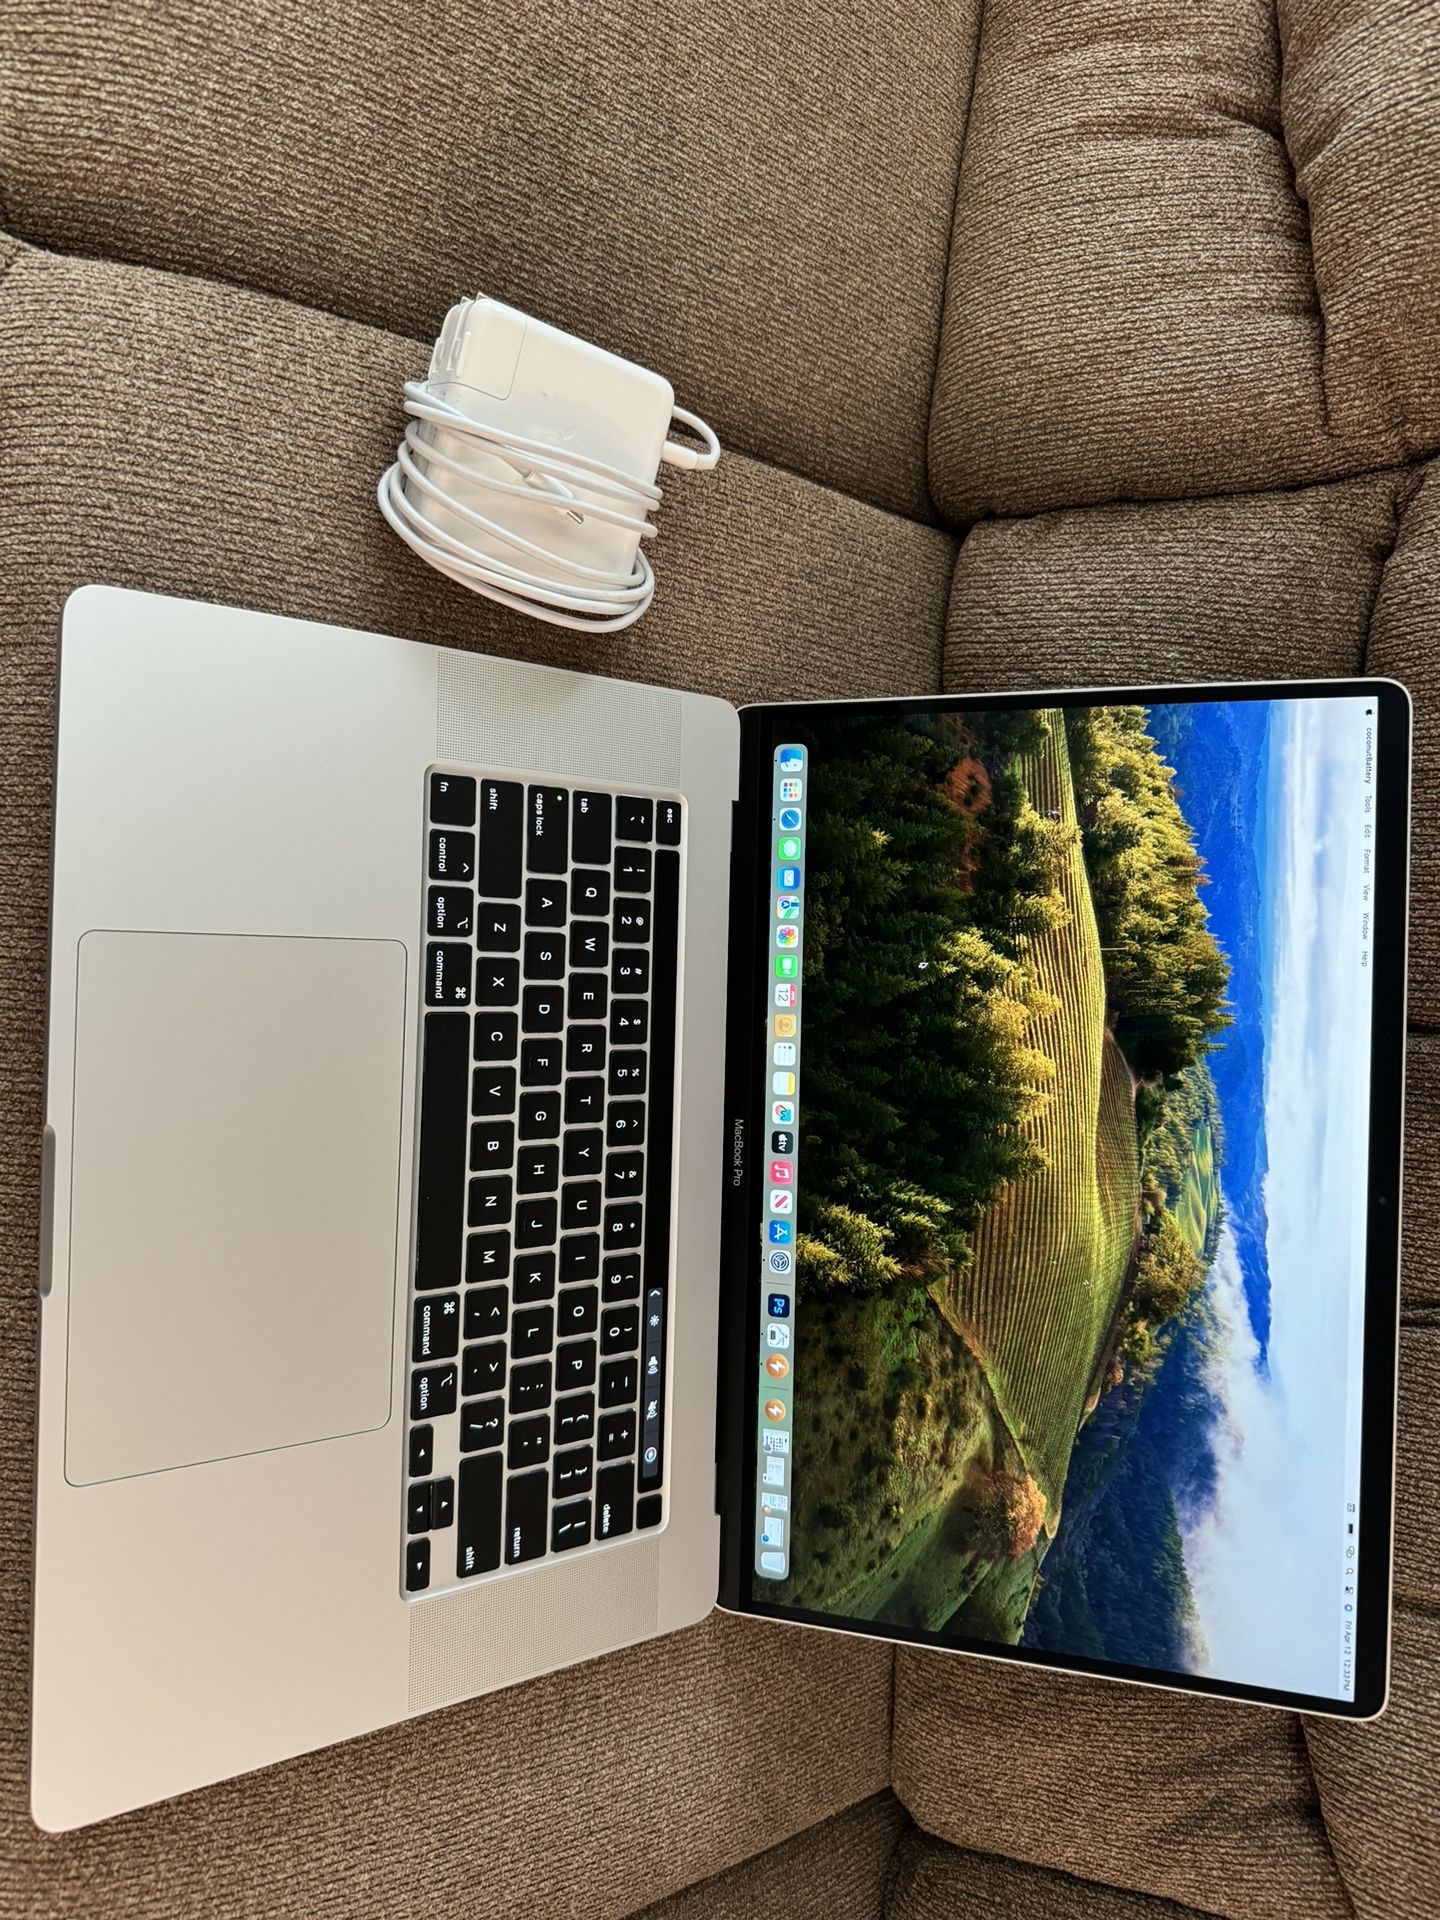 2019/2020 MacBook Pro 16”, i7 2.6ghz 6 Cores, 32gb ram,512gb.4GB graphic,33 Battery Cycles, Excellen